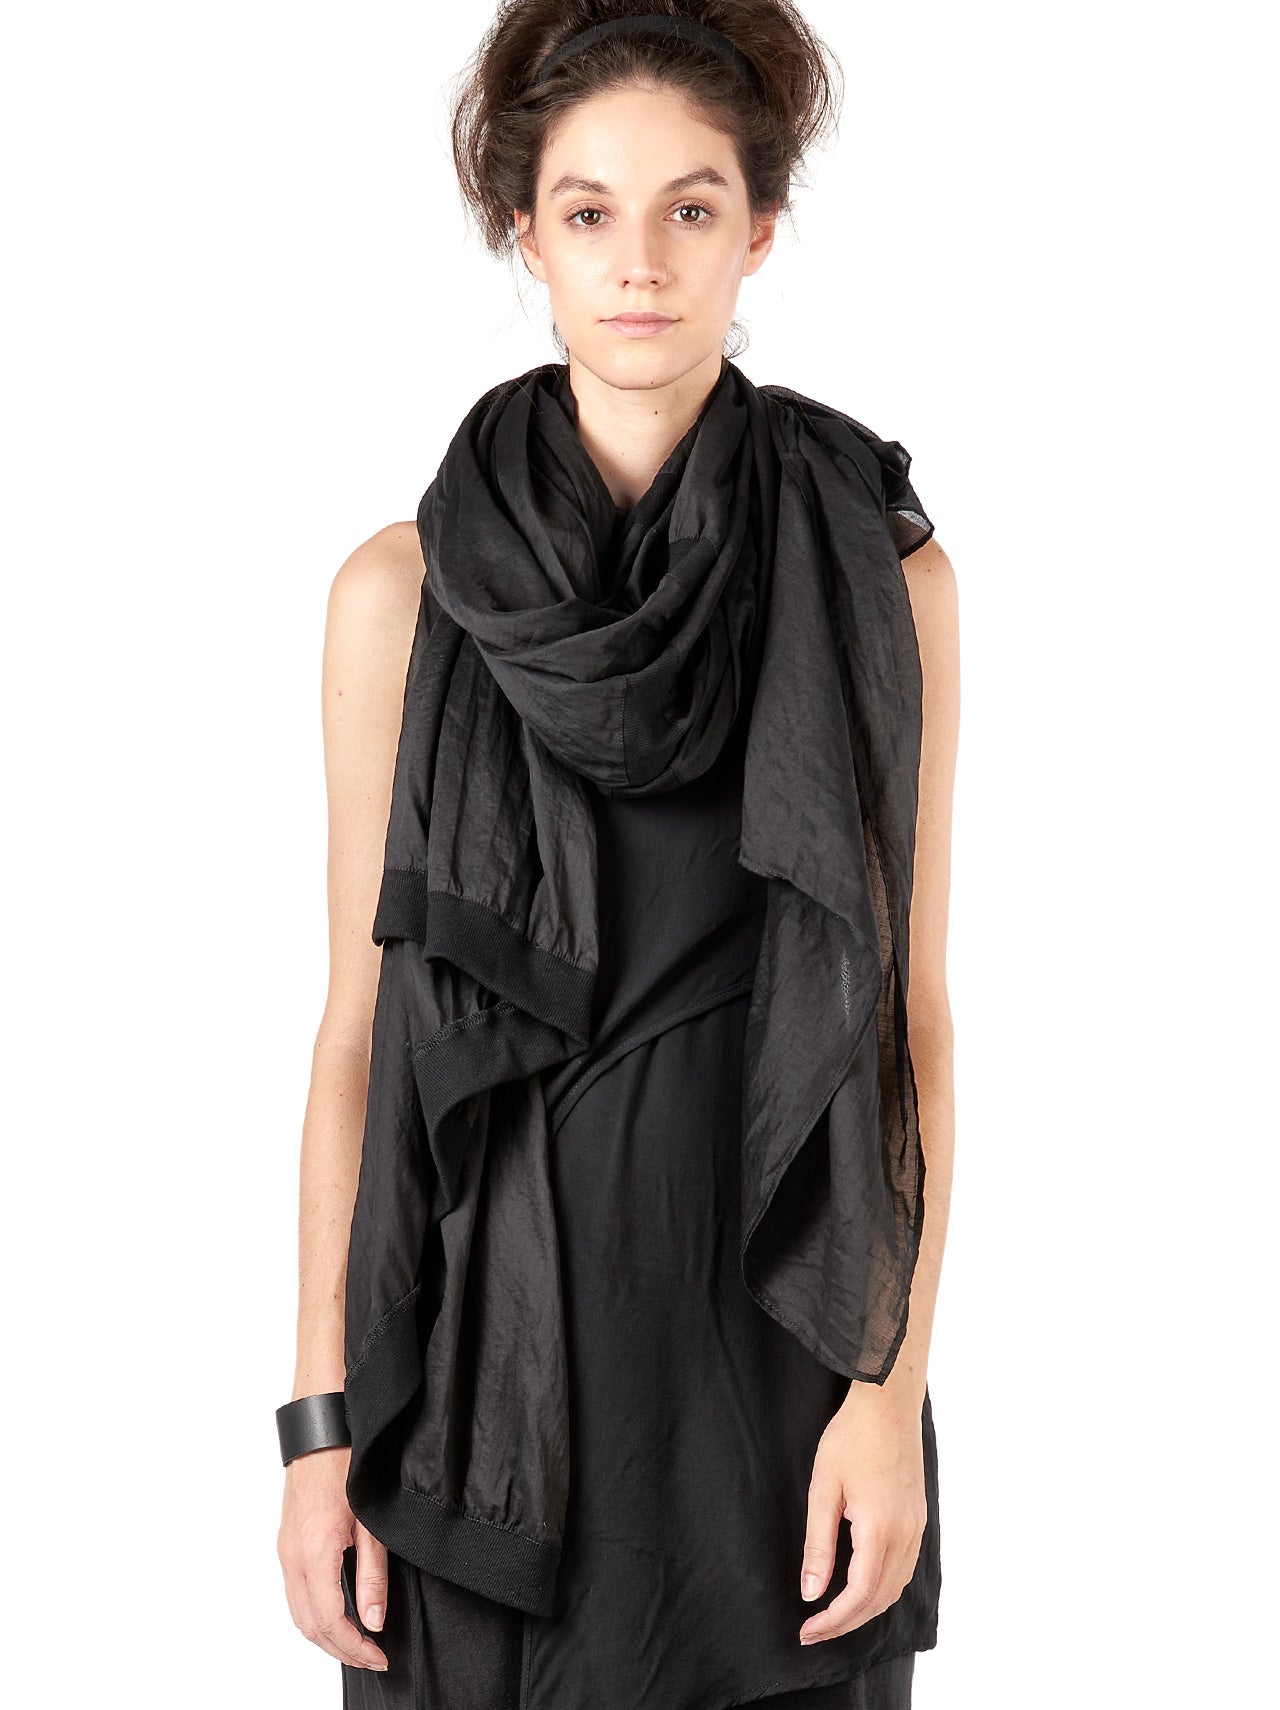 Shal oversized cotton scarf